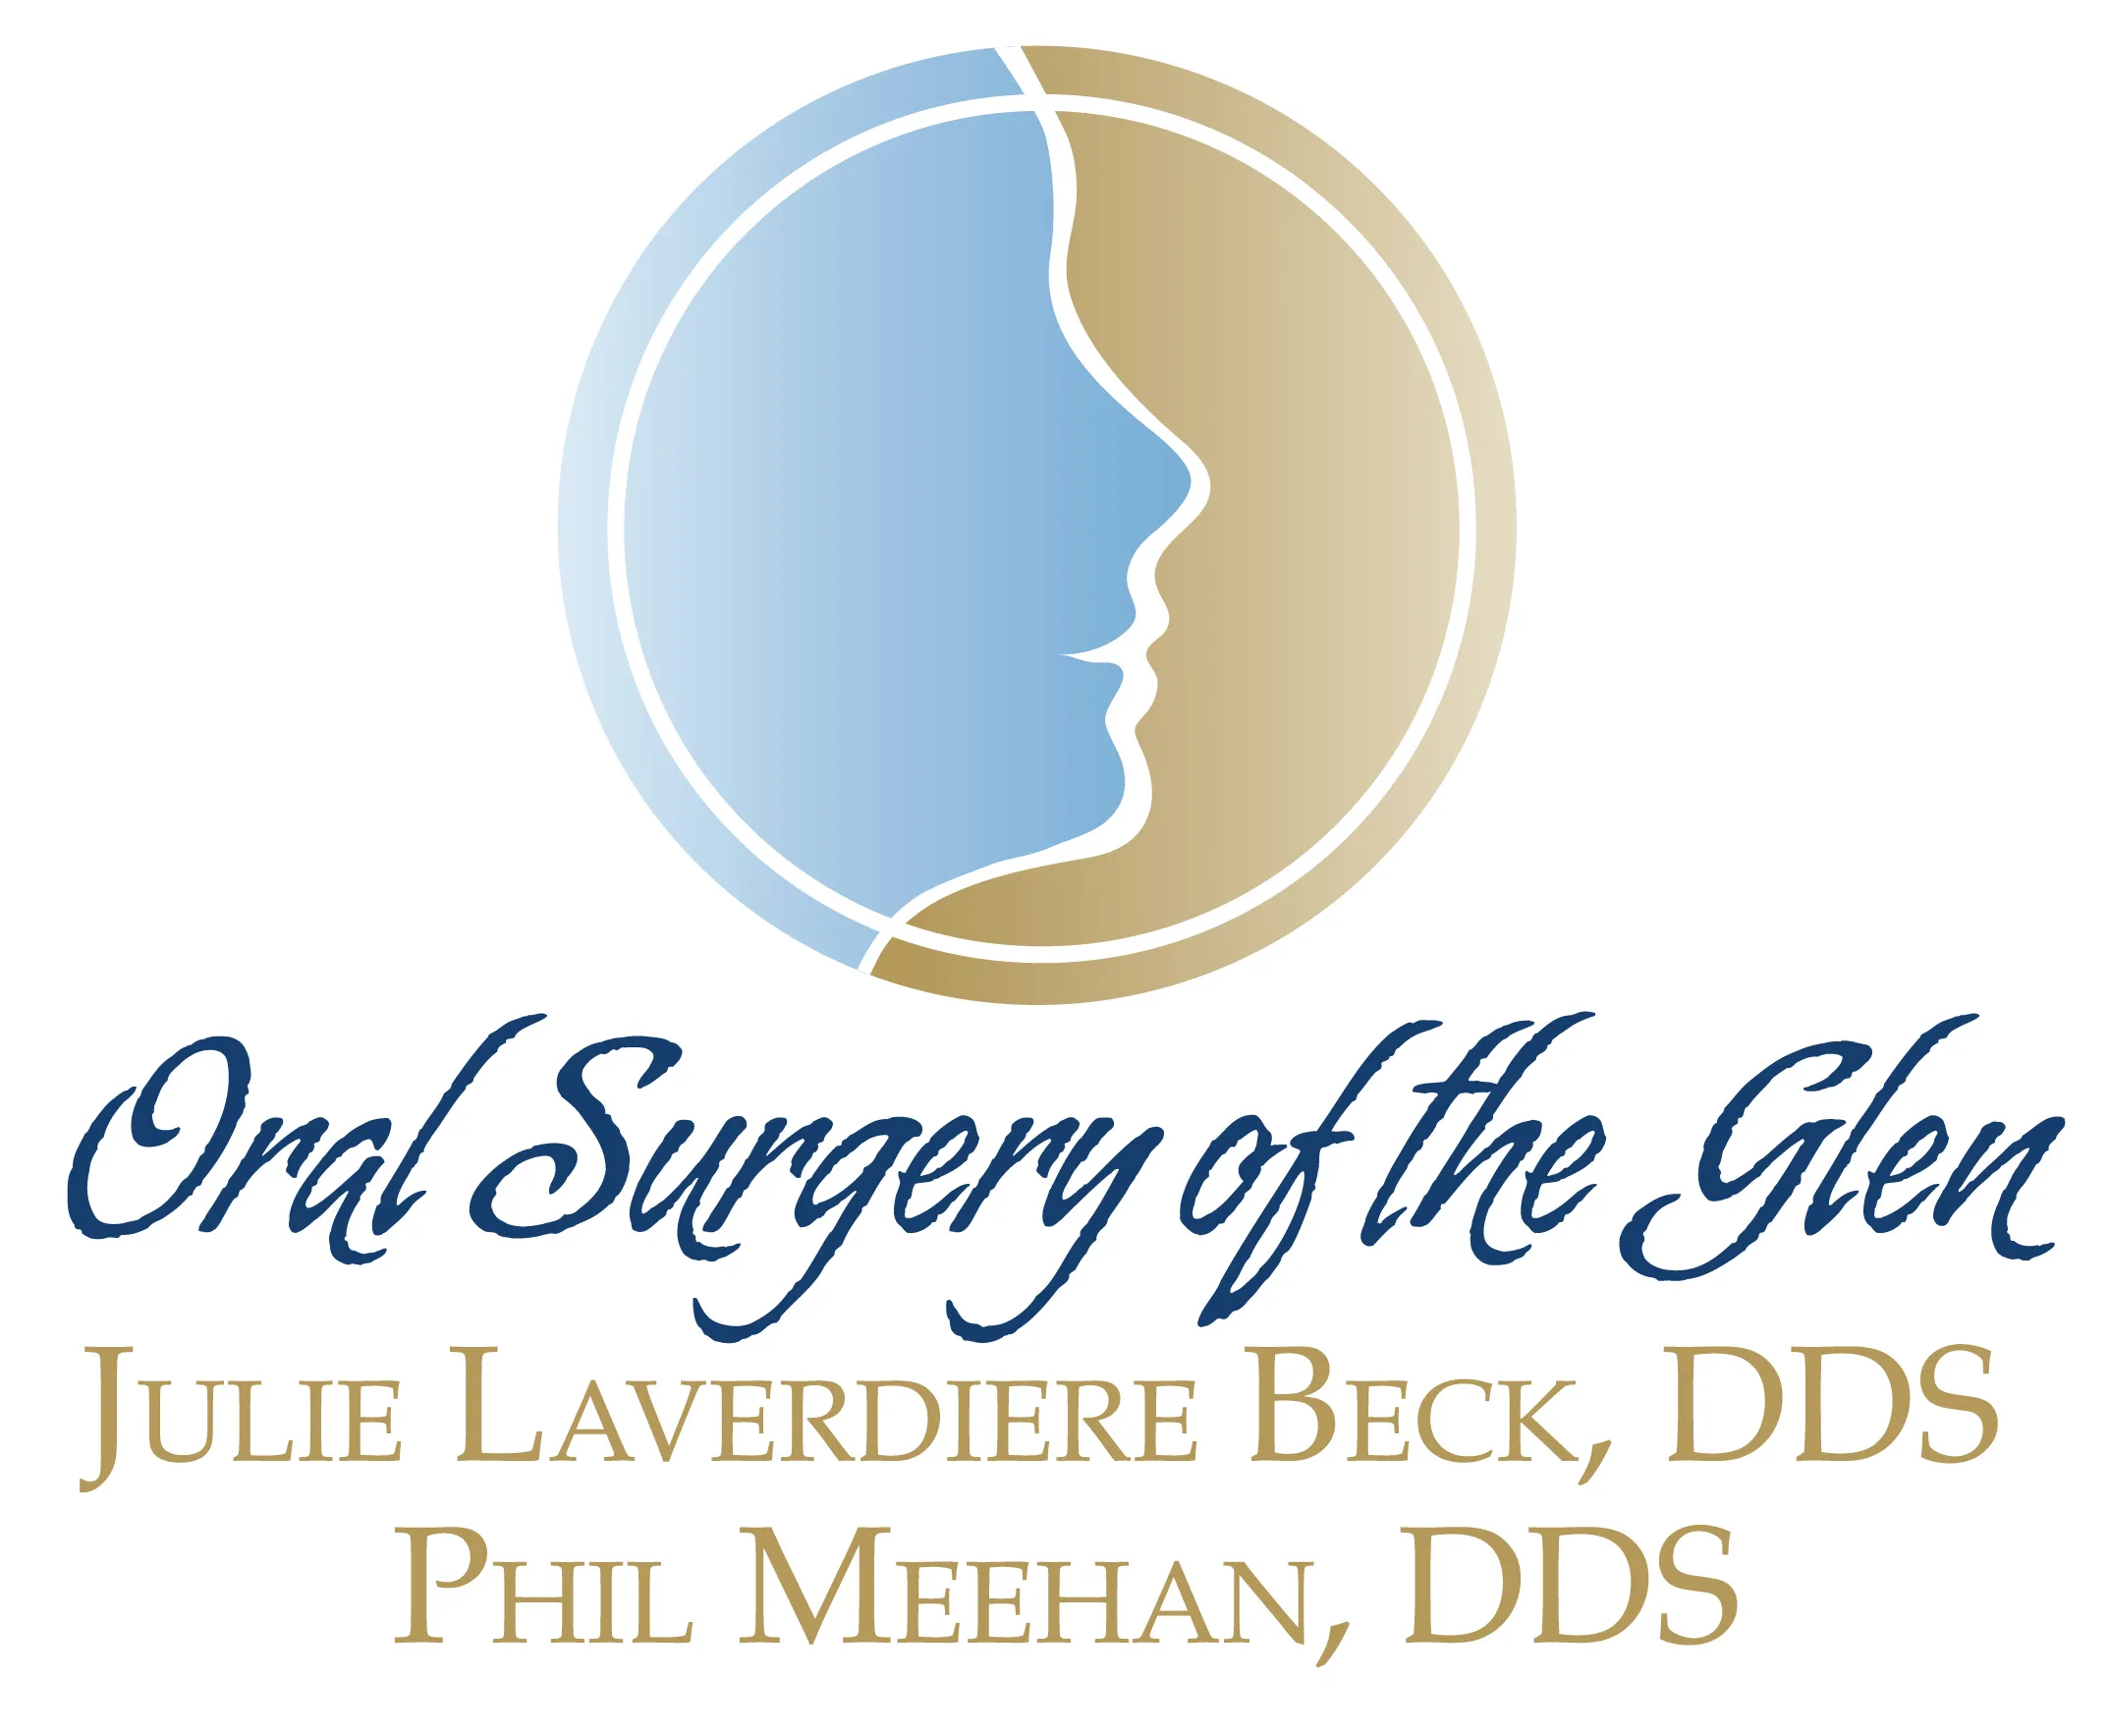 Link to Oral Surgery of The Glen home page